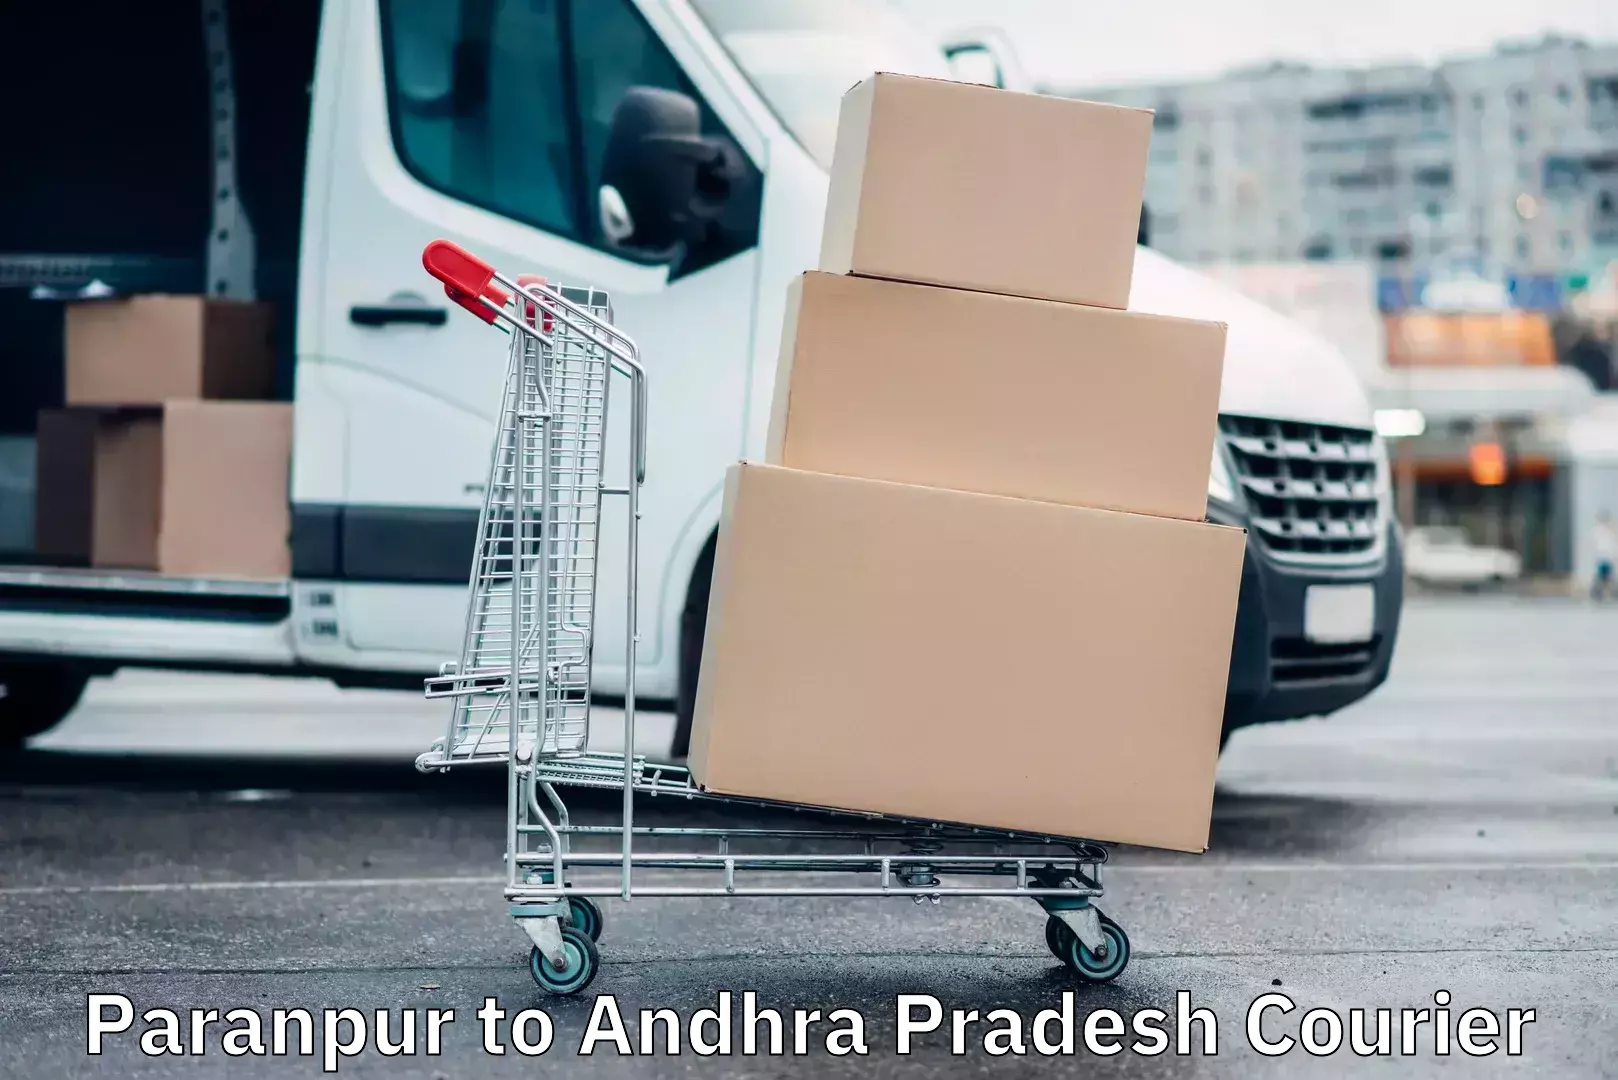 Sustainable delivery practices Paranpur to Andhra Pradesh